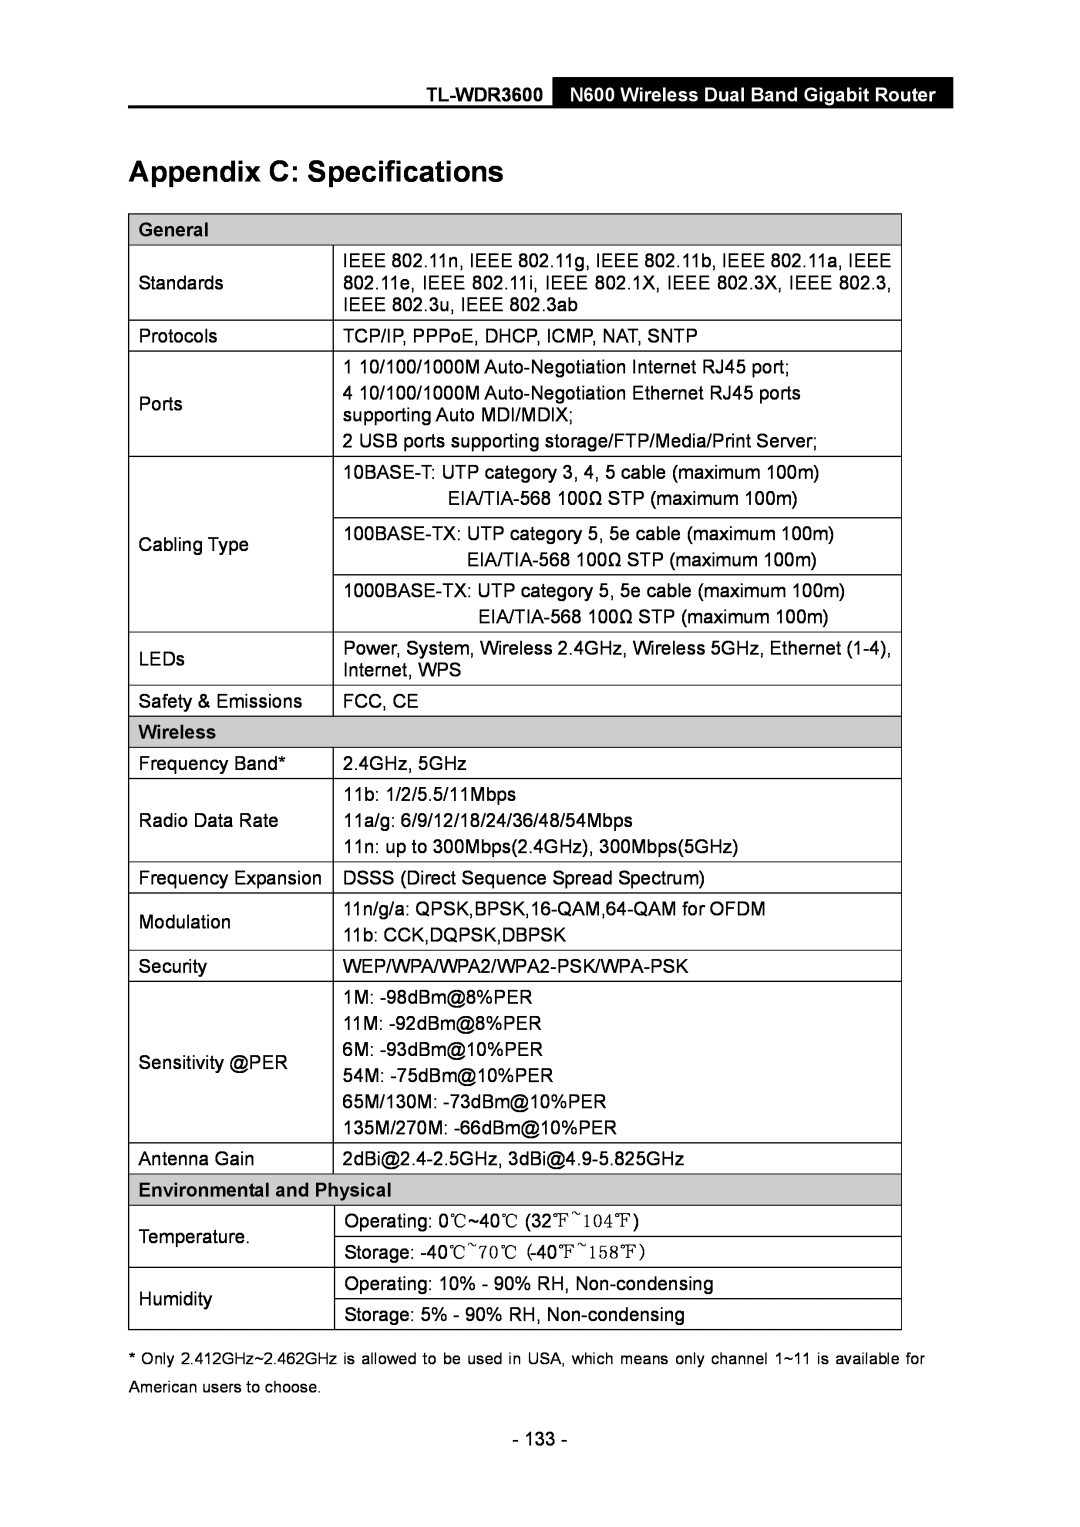 TP-Link TL-WDR3600 manual Appendix C Specifications, General, Wireless, Environmental and Physical 